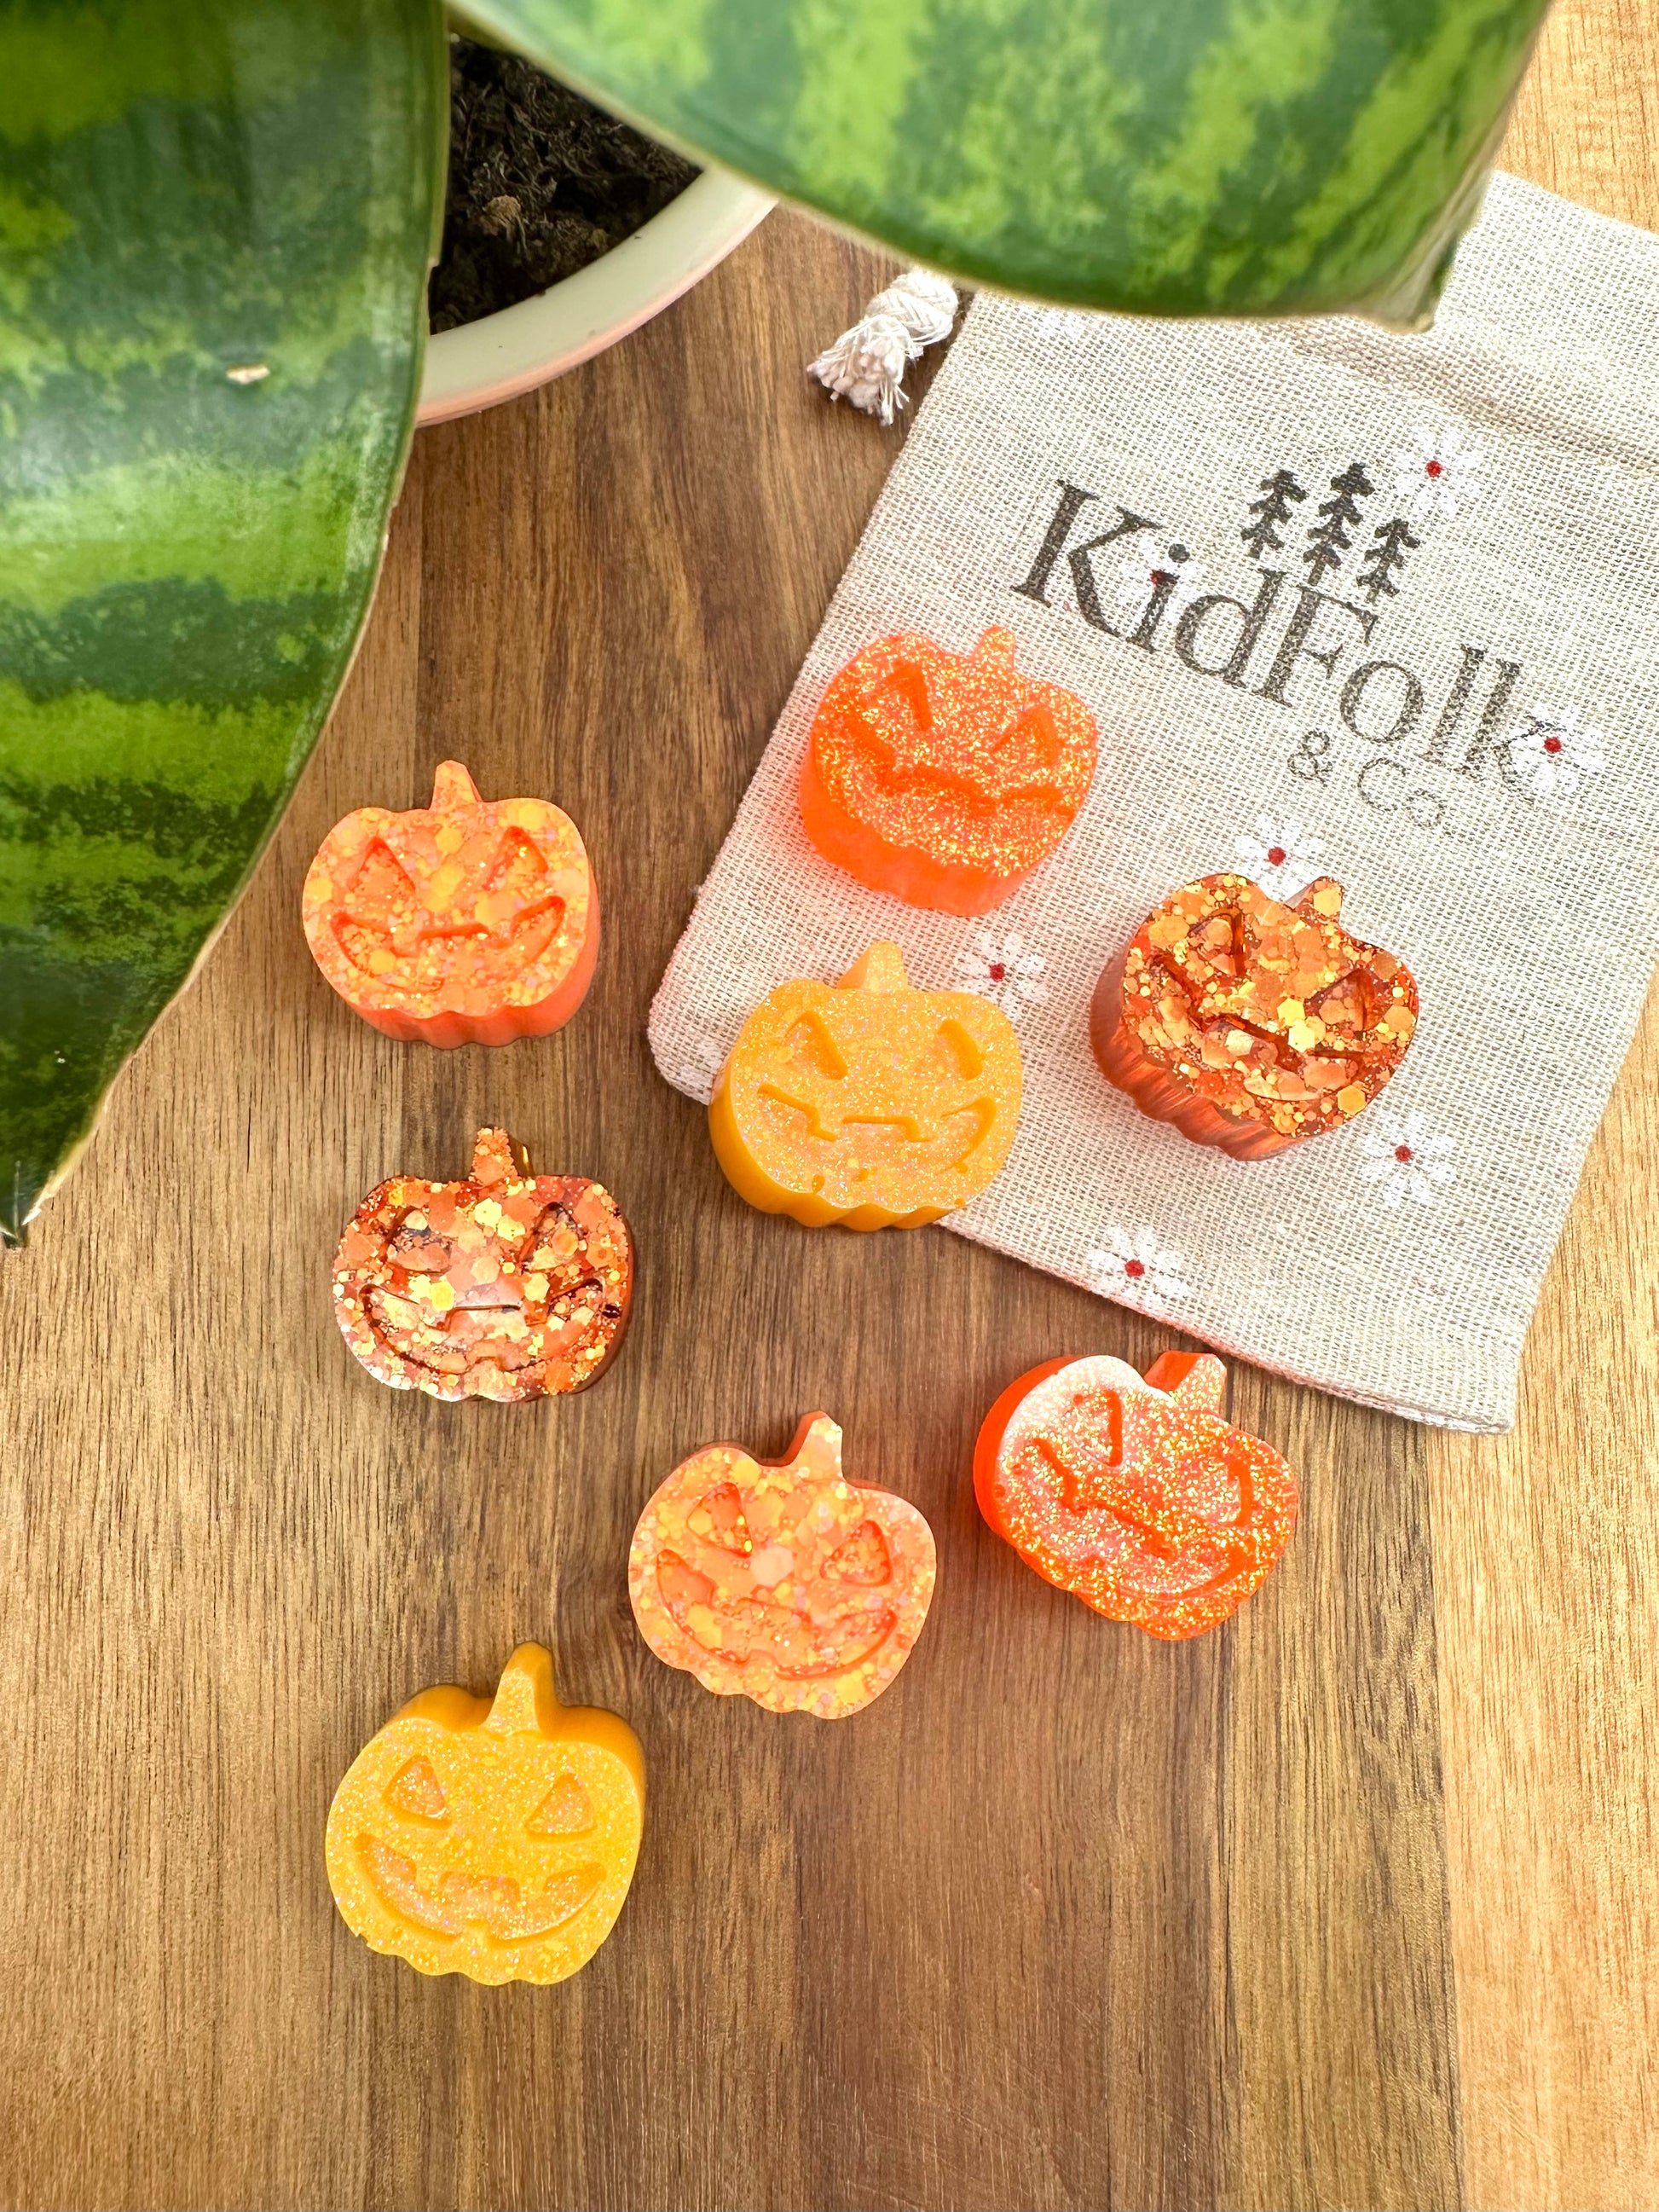 Jack O' Lantern Treat Bags: fill with goodies for a Halloween party!